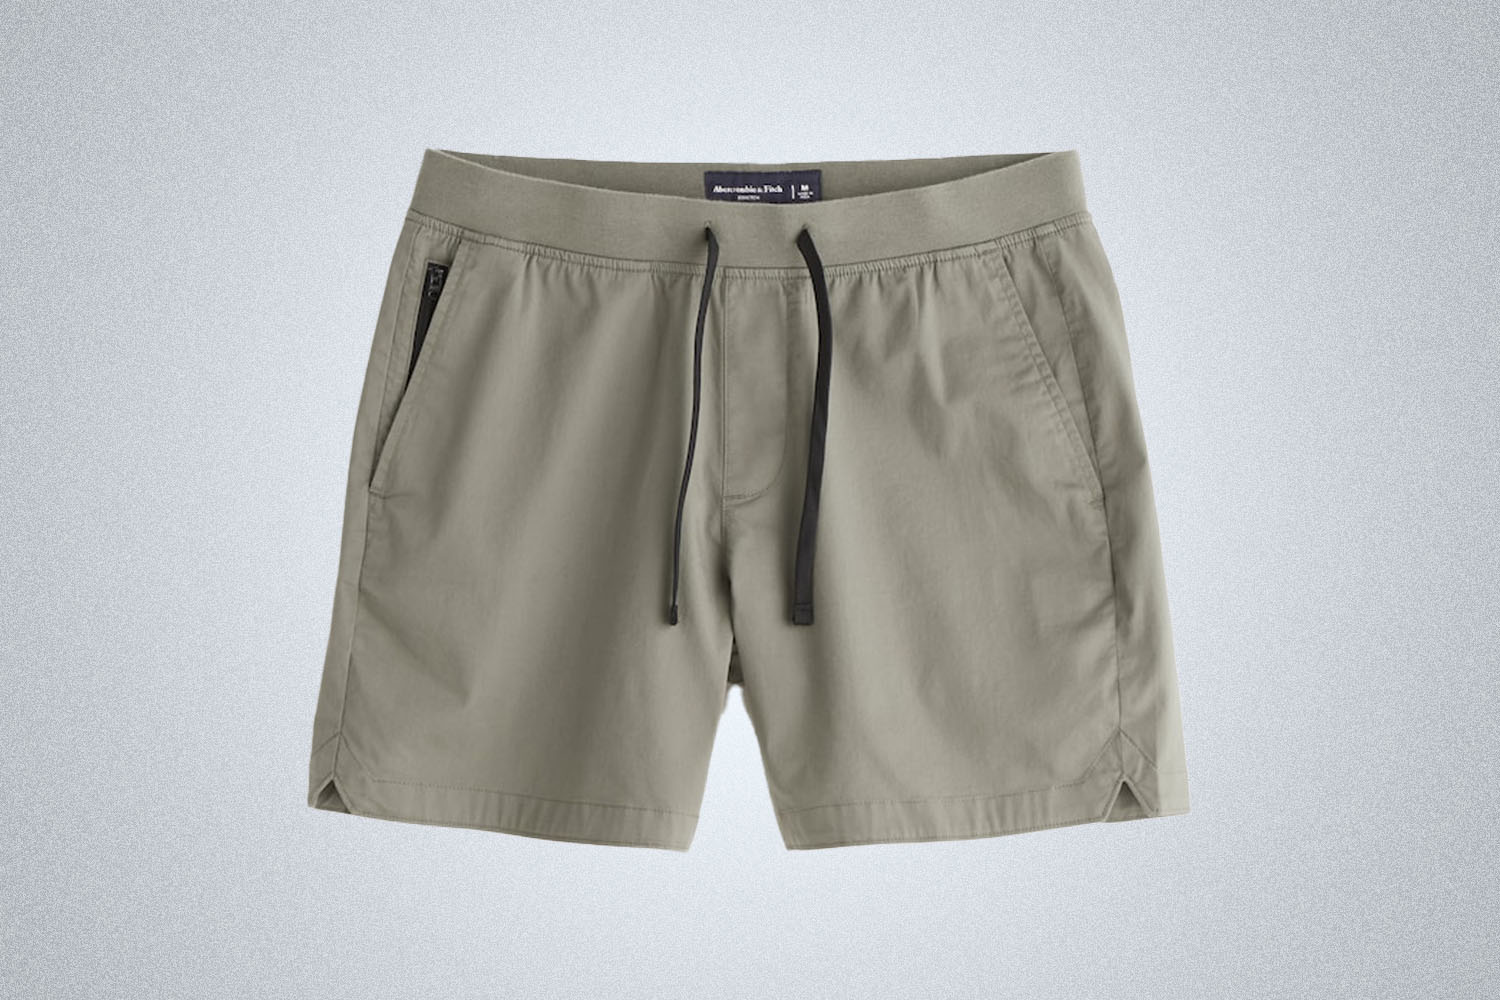 a pair of green shorts on a grey background